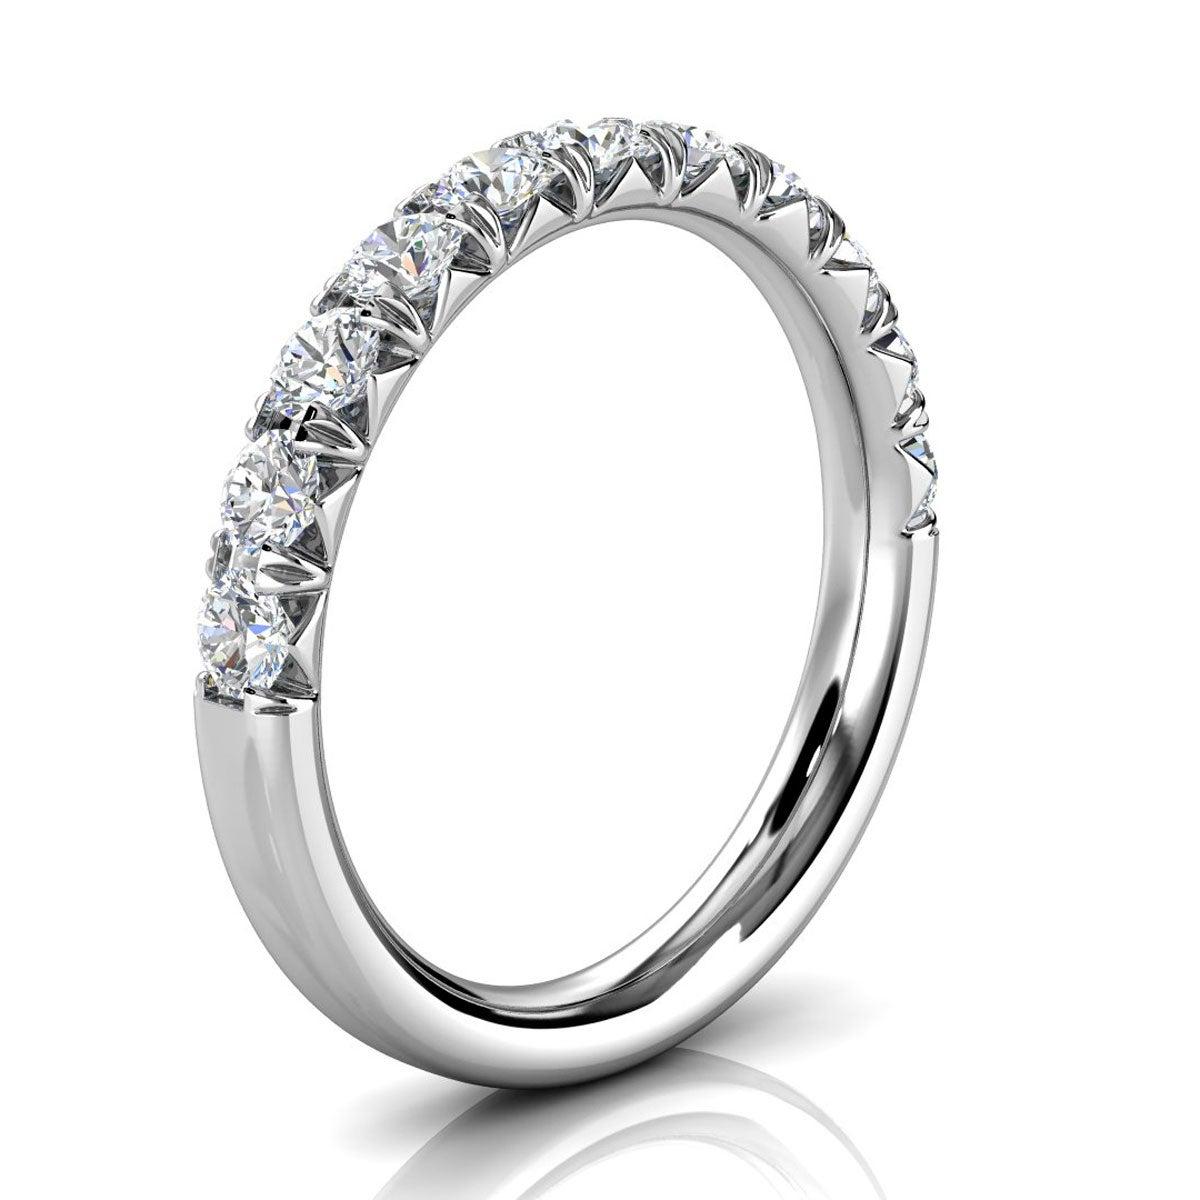 For Sale:  14k White Gold Voyage French Pave Diamond Ring '3/4 Ct. Tw' 2